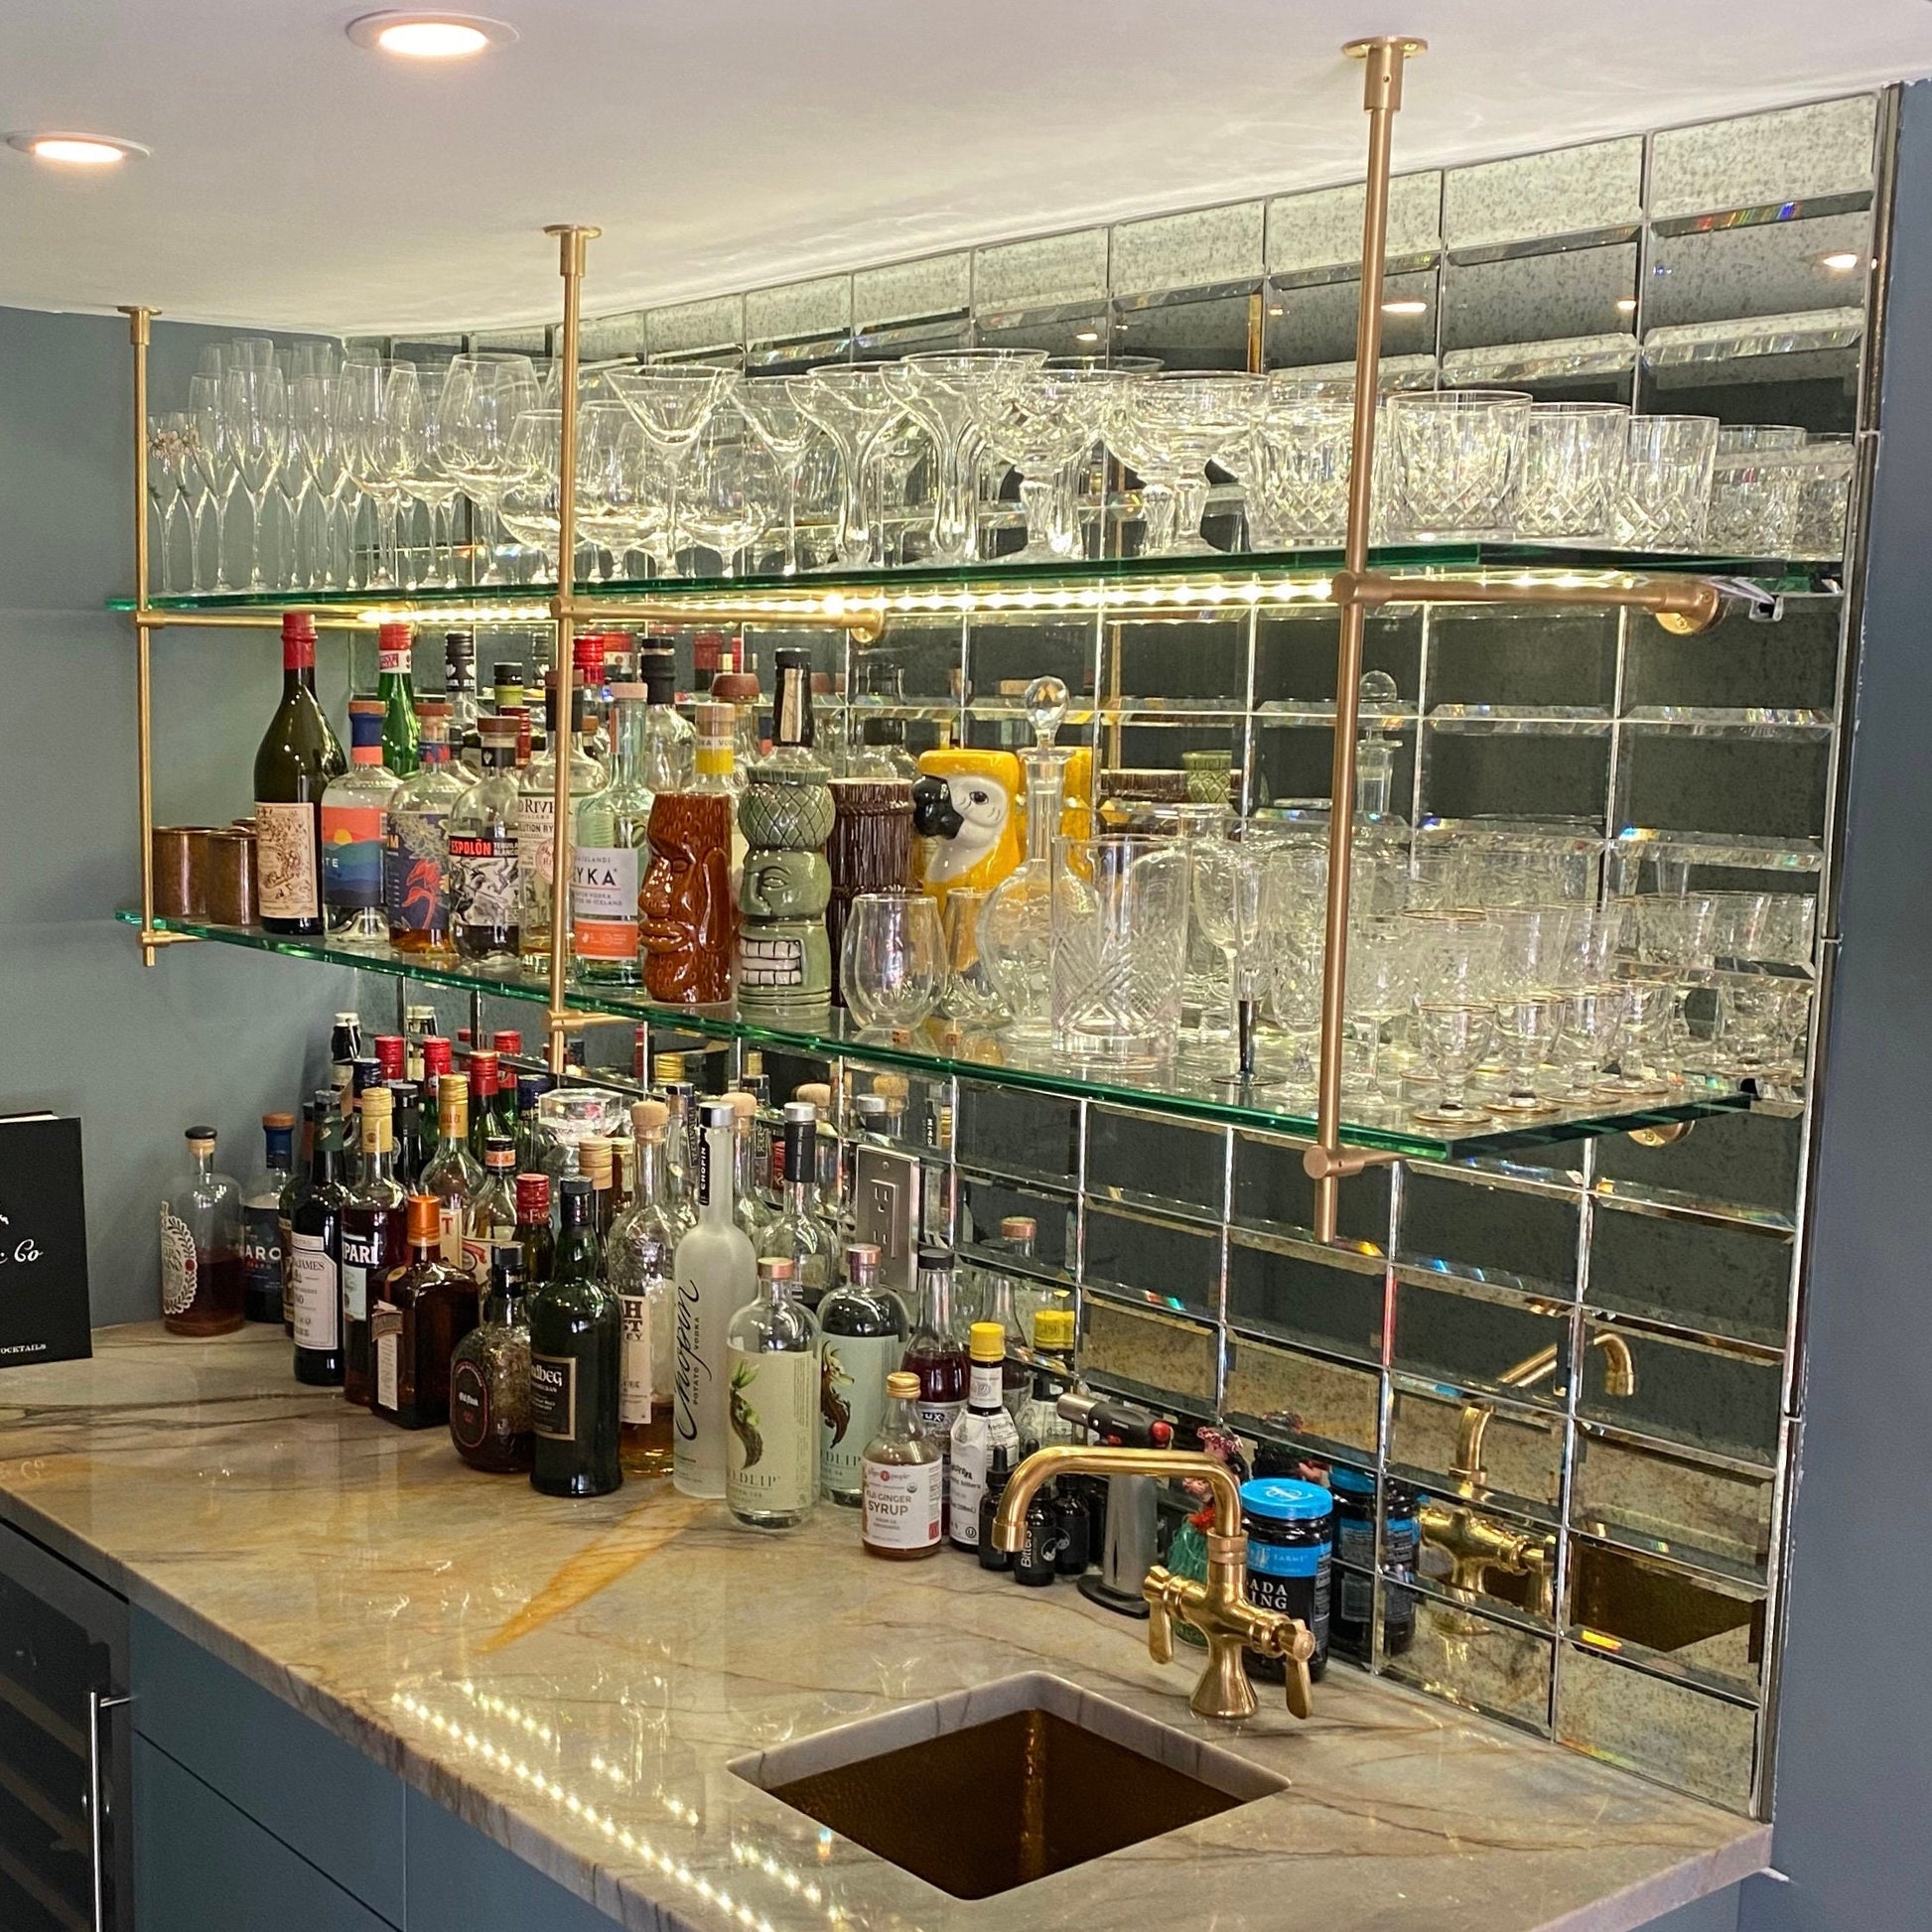 Industrial chic brass bar shelving with glass accents - Trendy industrial chic brass bar shelving adorned with glass accents, perfect for adding a modern edge to your bar area.